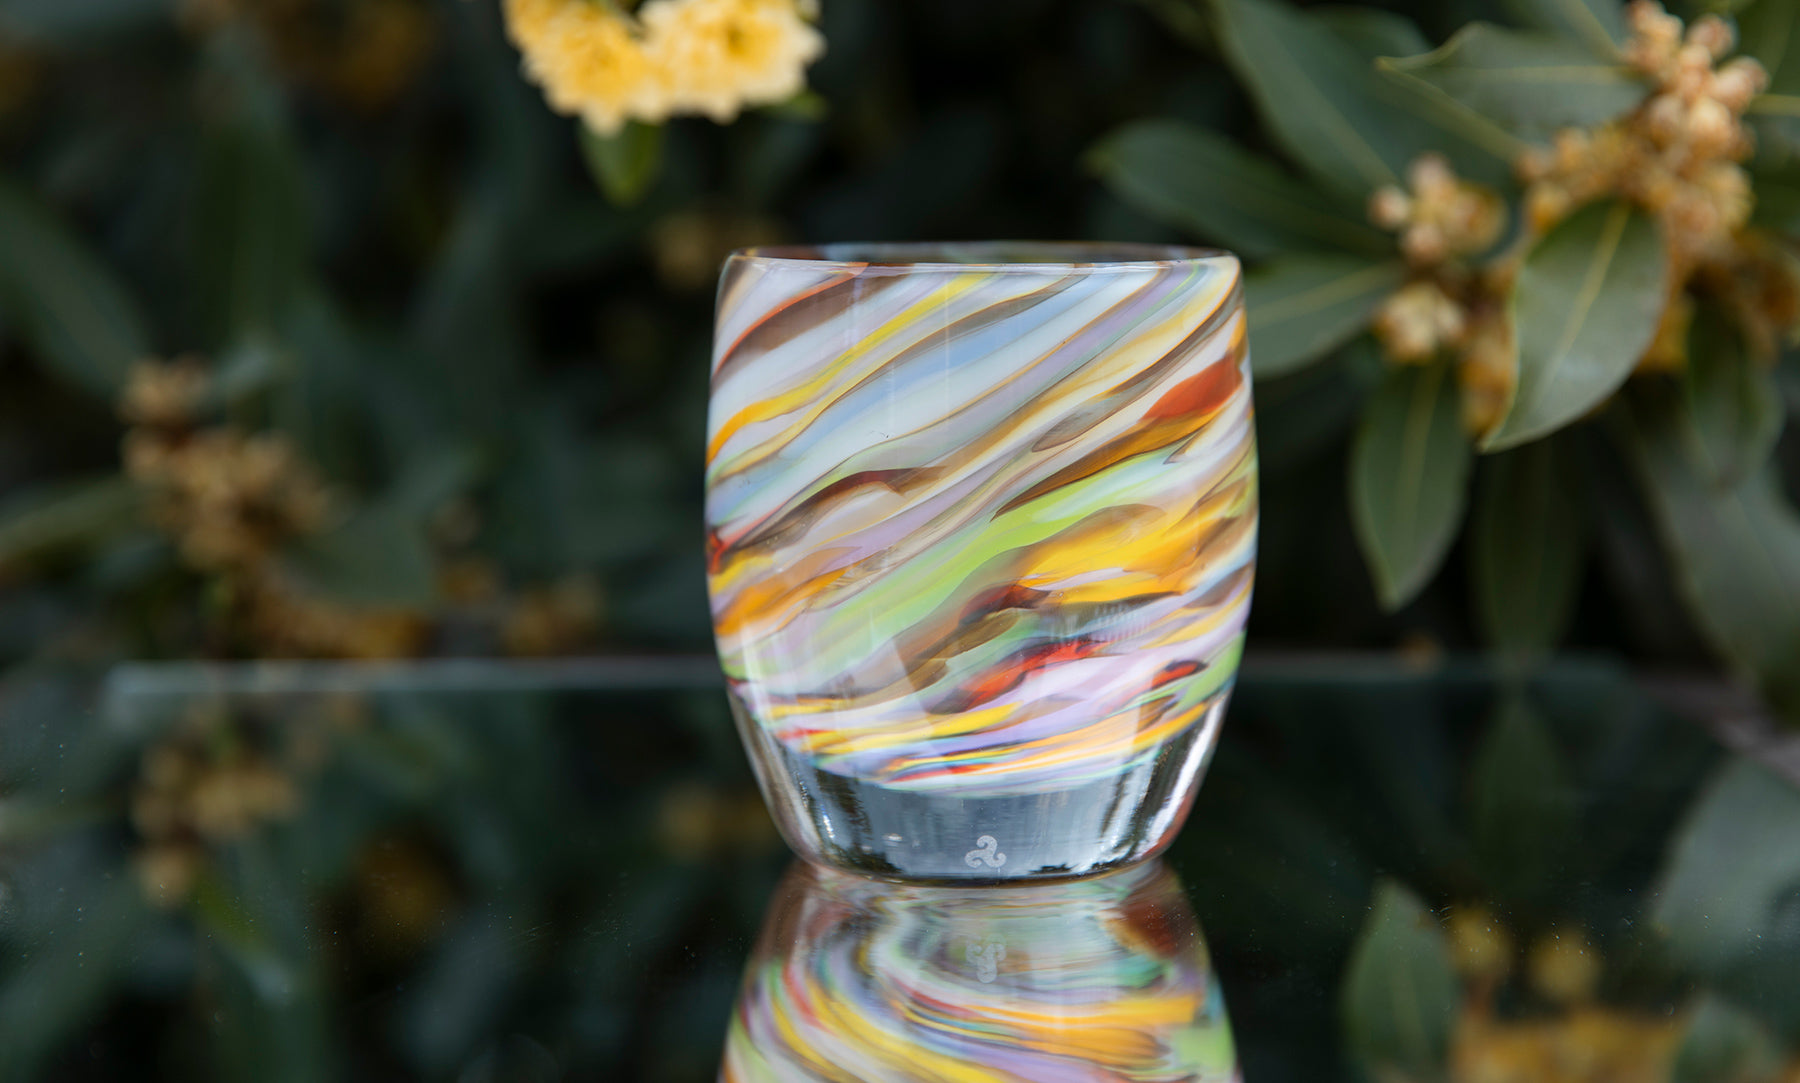 living color, hand-blown glass candle holder with multiple colors resting on a glass table with flowers in the background. 